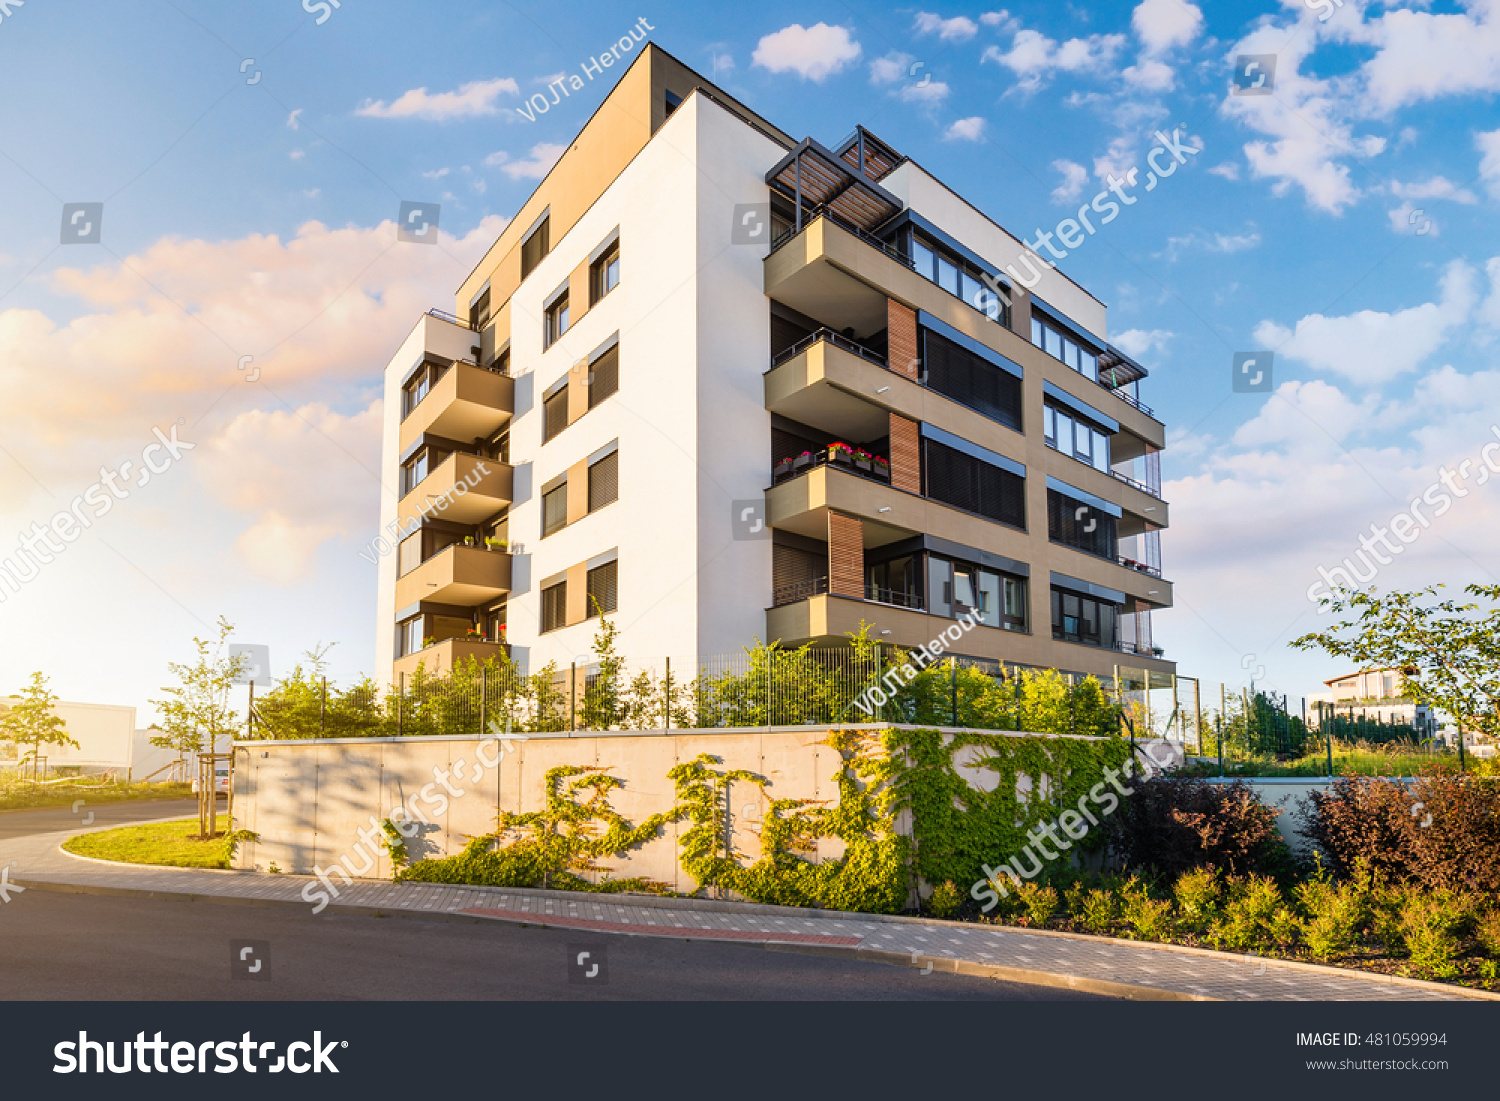 New modern block of flats in green area with blue sky #481059994